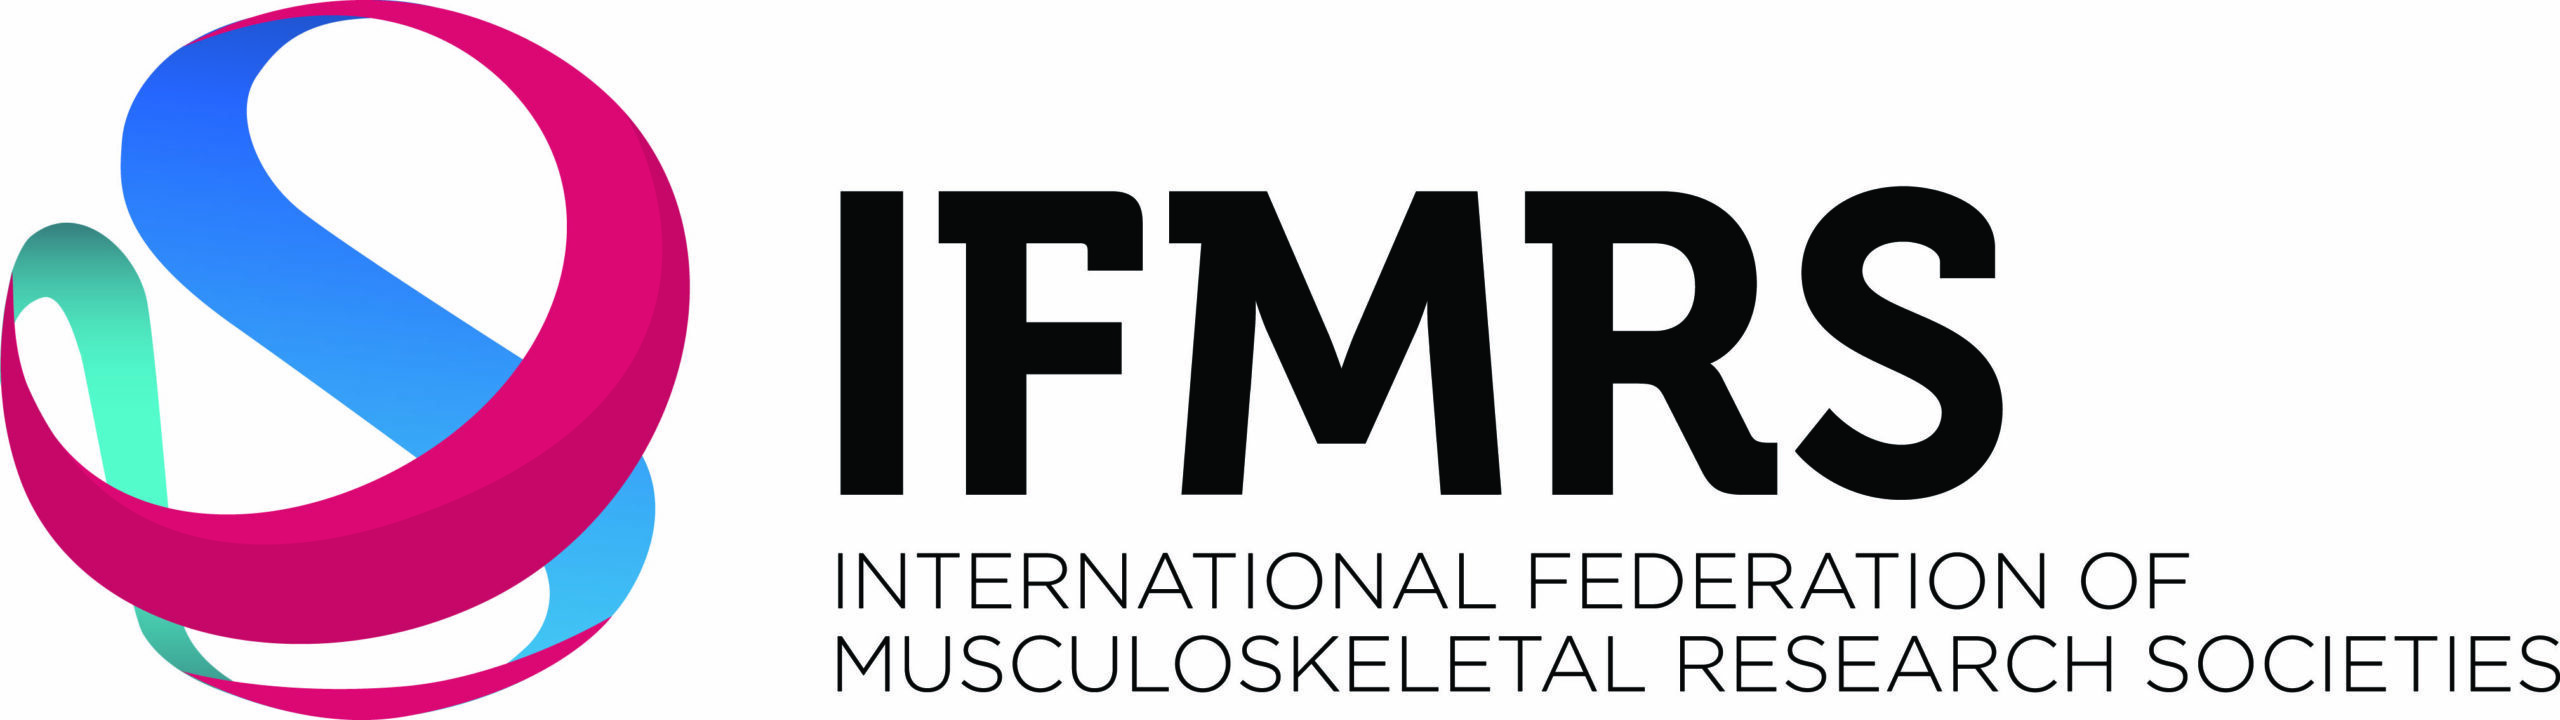 INTERNATIONAL FEDERATION OF MUSCULOSKELETAL RESEARCH SOCIETIES (IFMRS)